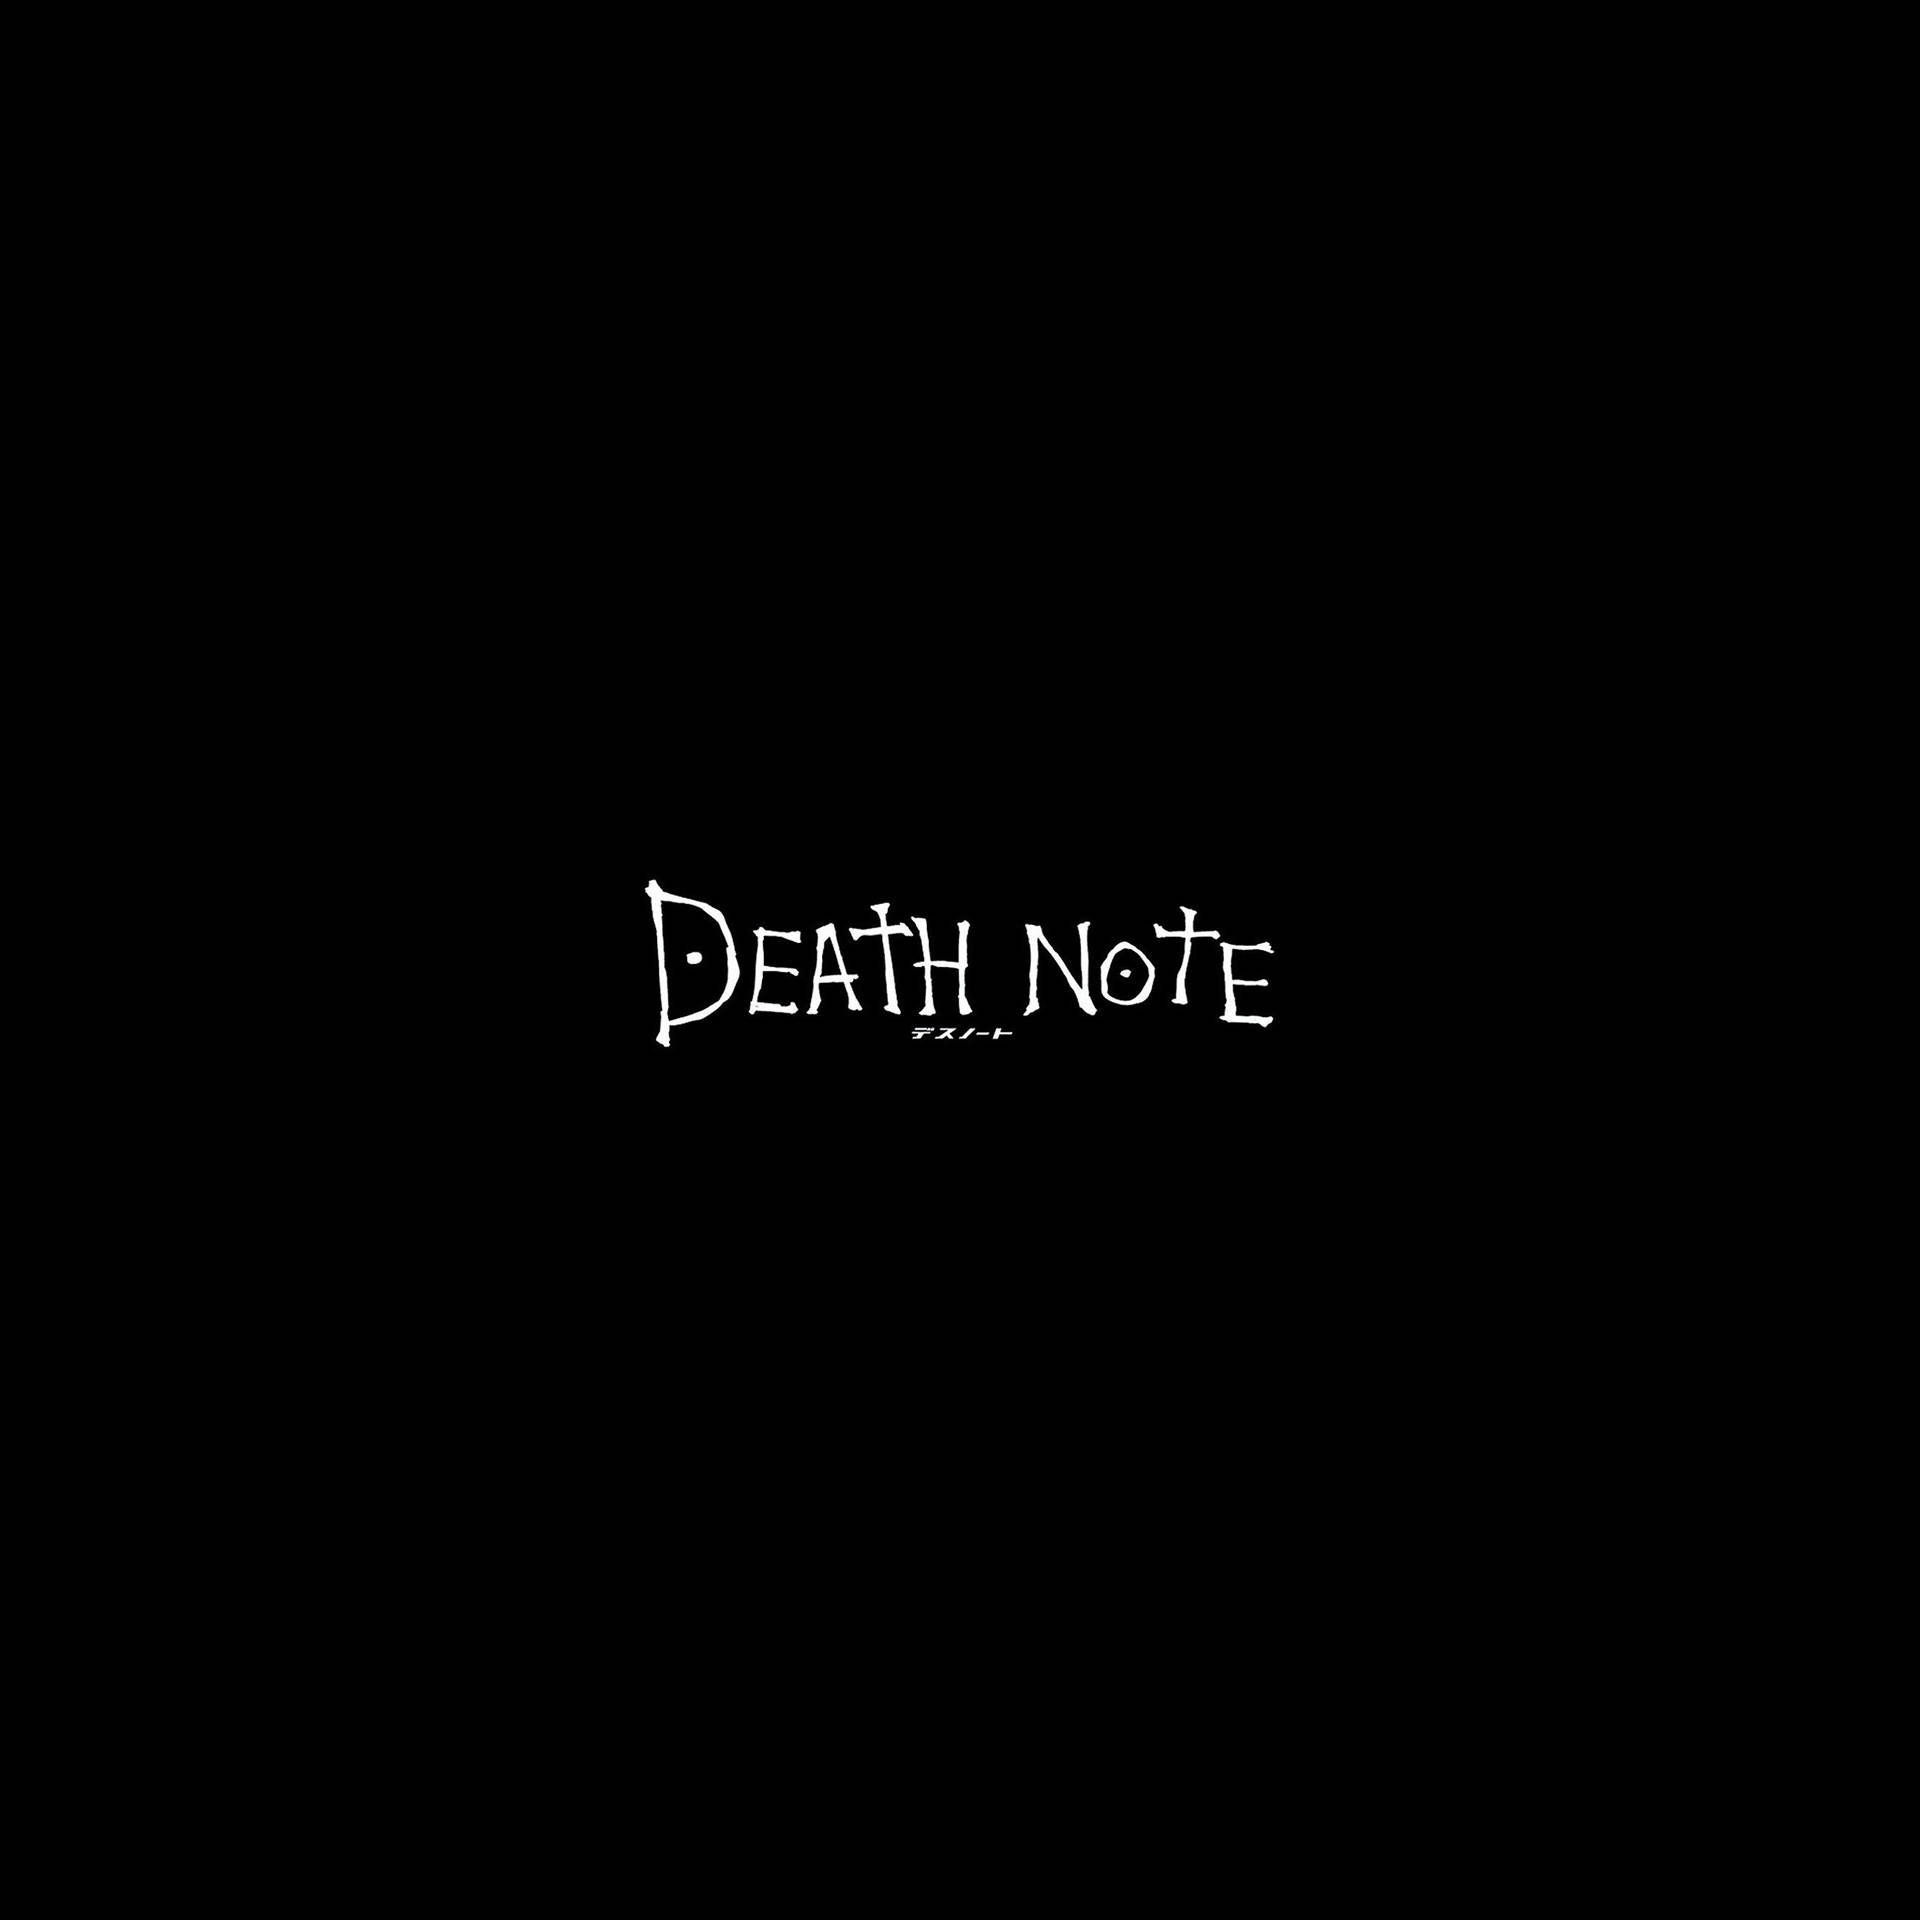 Death Note Aesthetic With Japanese Title Wallpaper